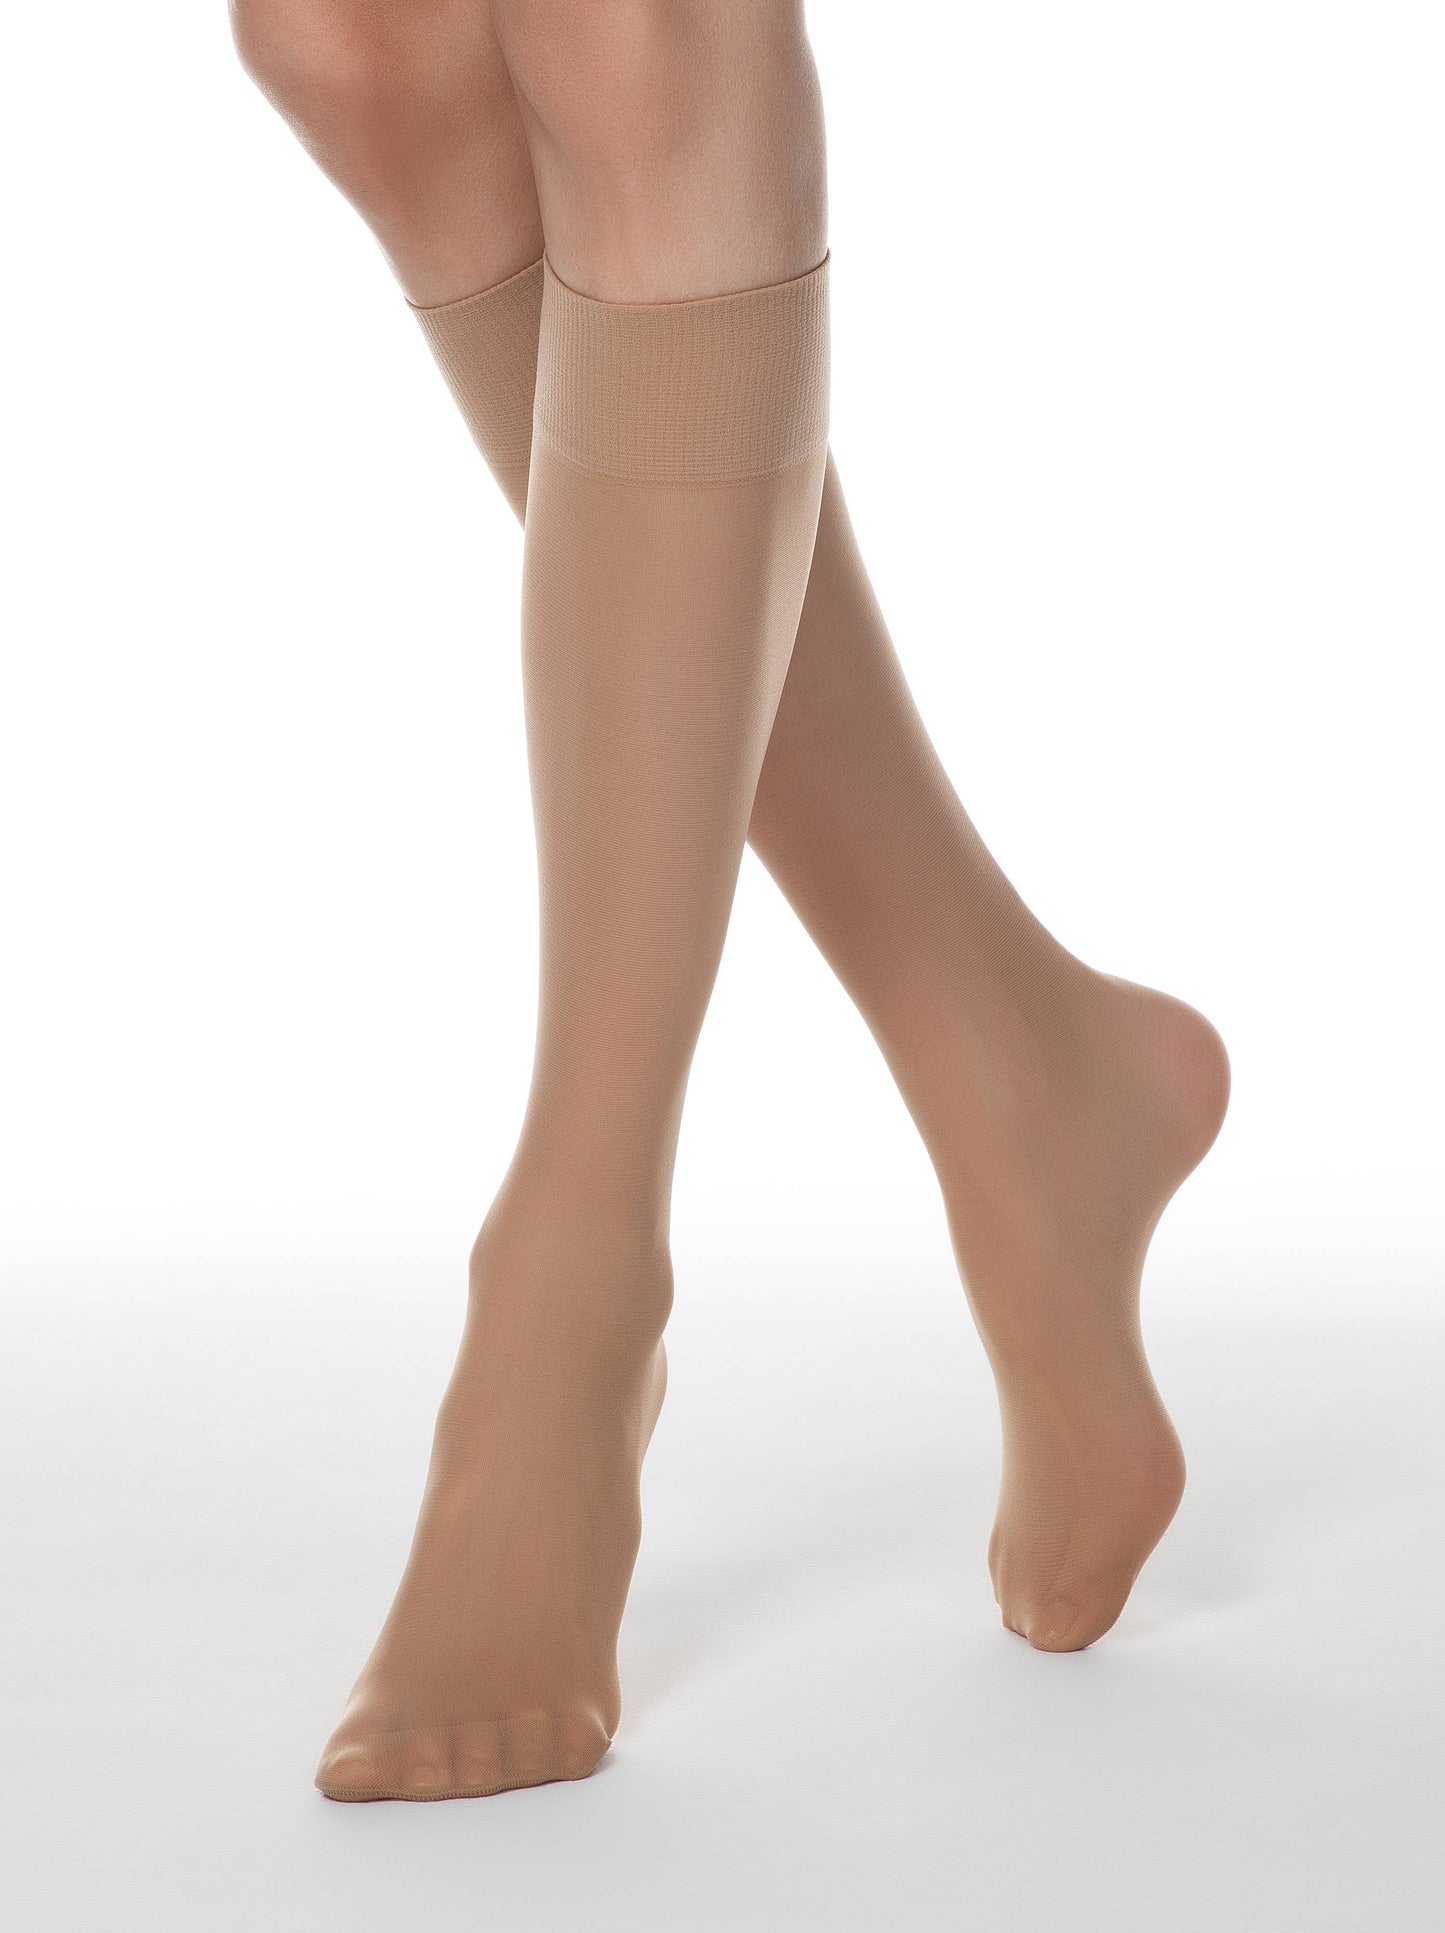 Conte/Esli Accent 40 Den - Tight Knee-Highs For Women - 2 Pairs (Pack) (8С-2СПЕ)